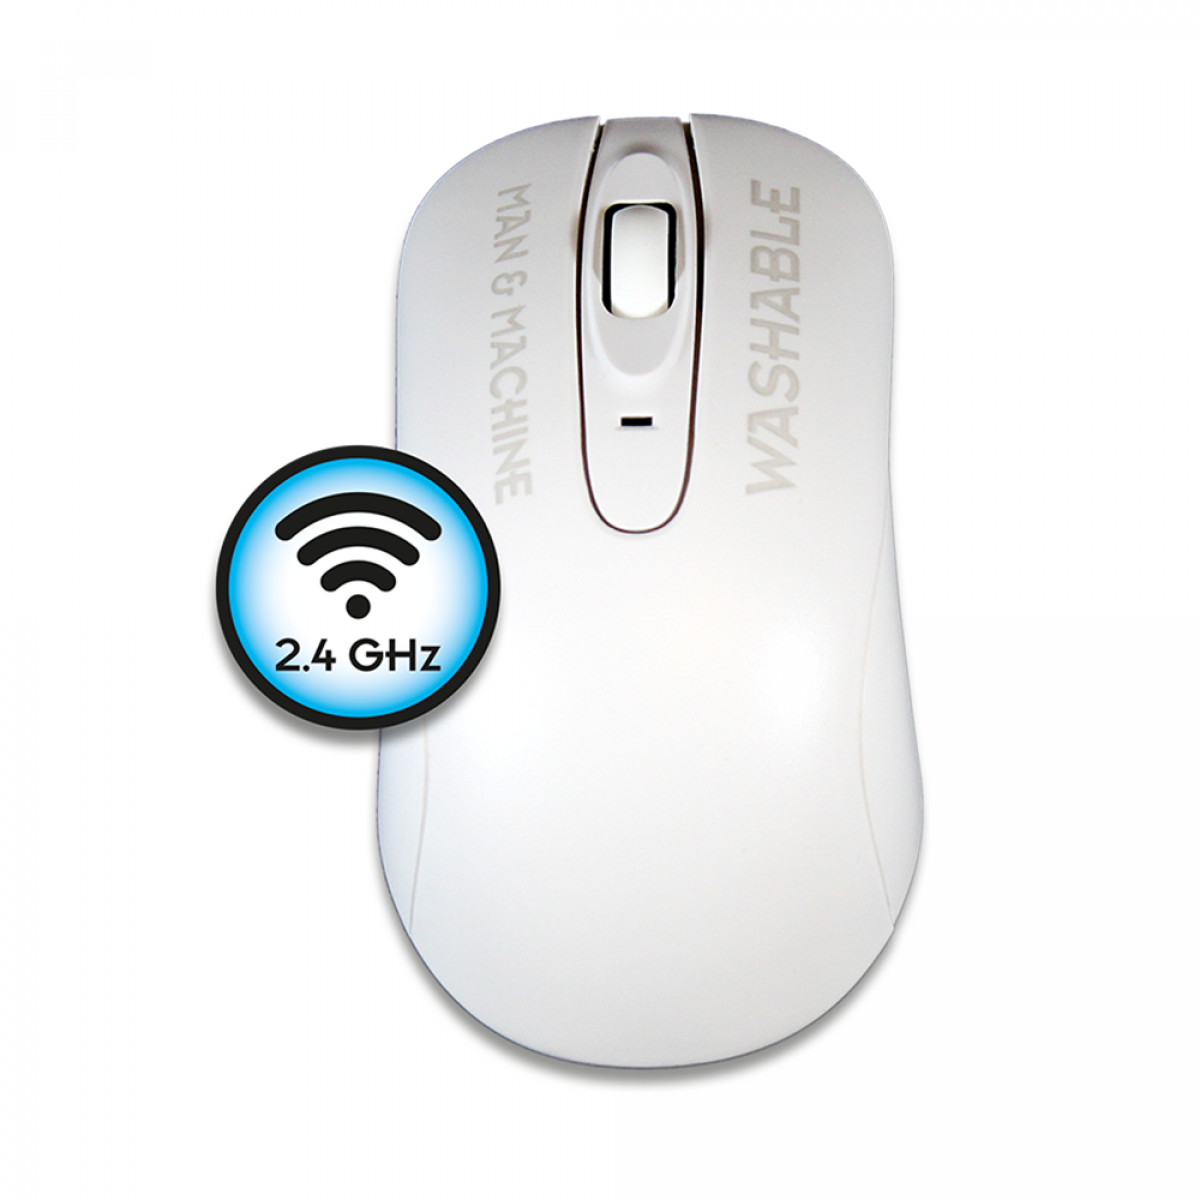 Medical grade peripherals - C Mouse Wireless